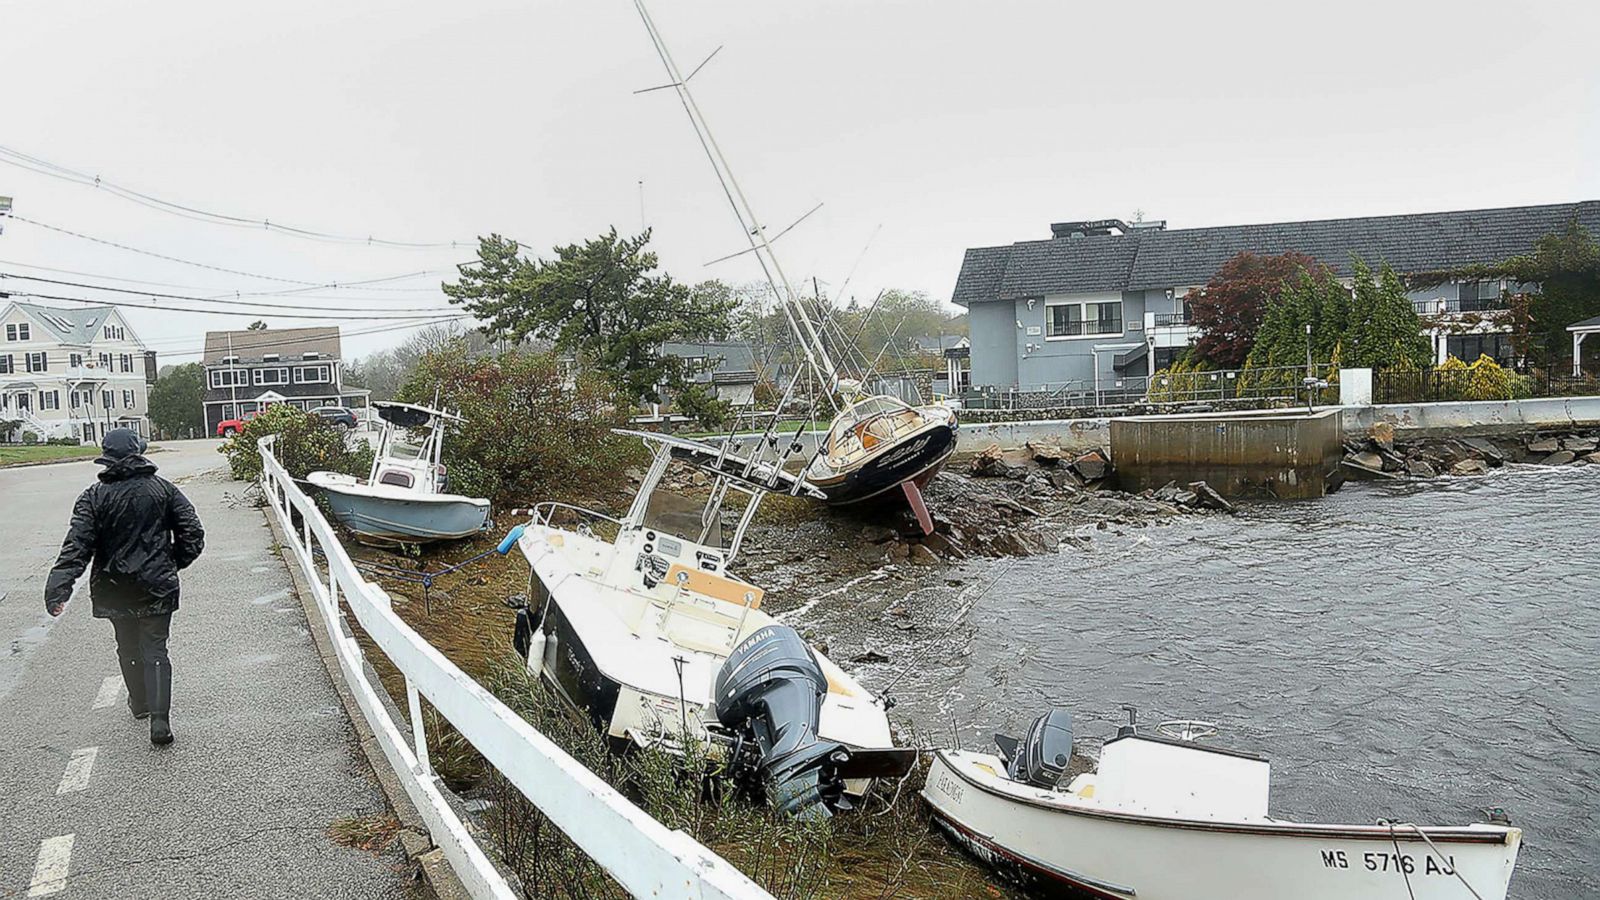 Nor'easter blows through Baldwin, Herald Community Newspapers